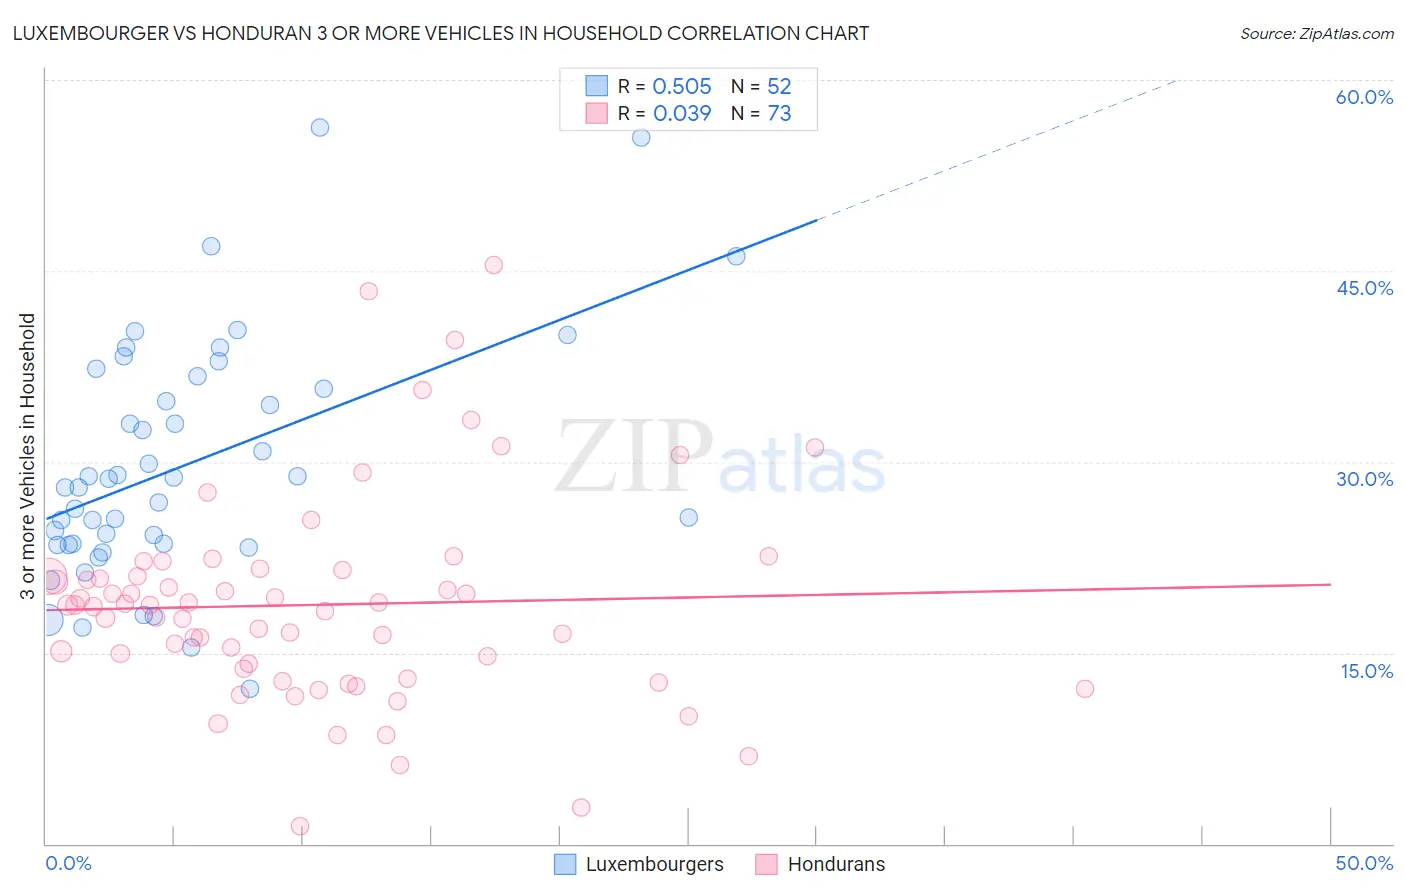 Luxembourger vs Honduran 3 or more Vehicles in Household